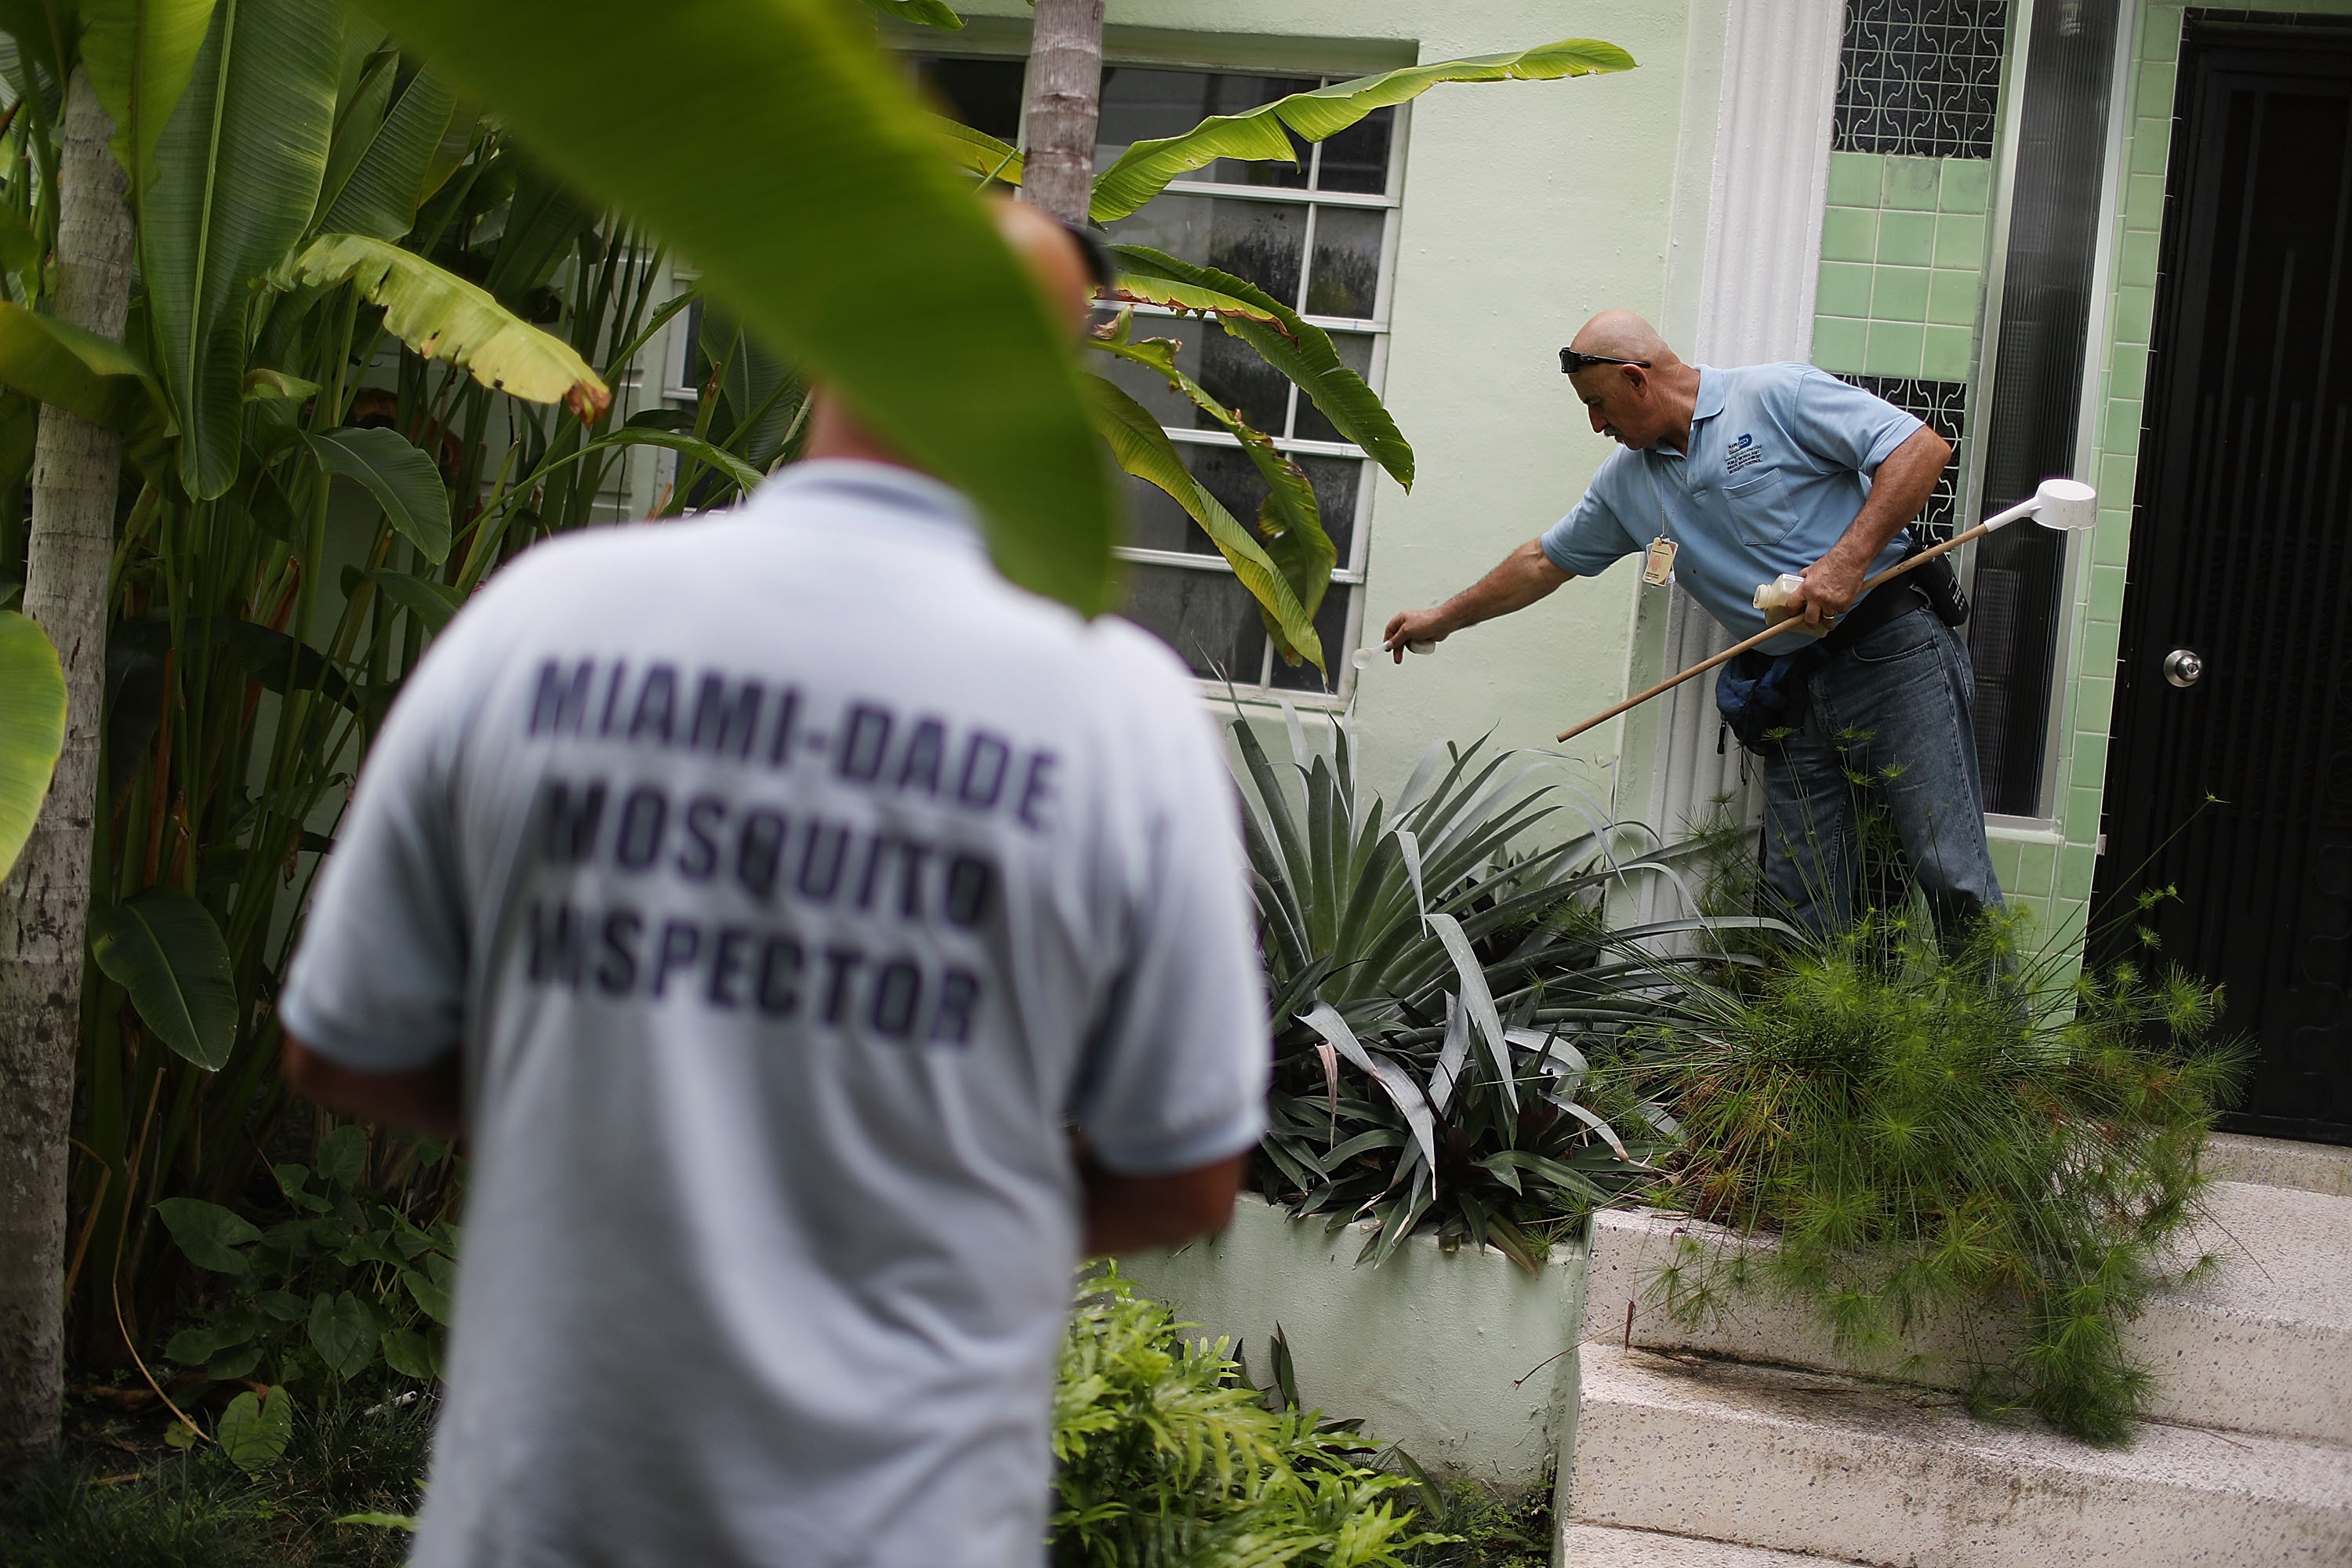 A man in a shirt reading “Miami-Dade Mosquito Inspector” stands outside a house with vegetation while another man spreads material on plants.